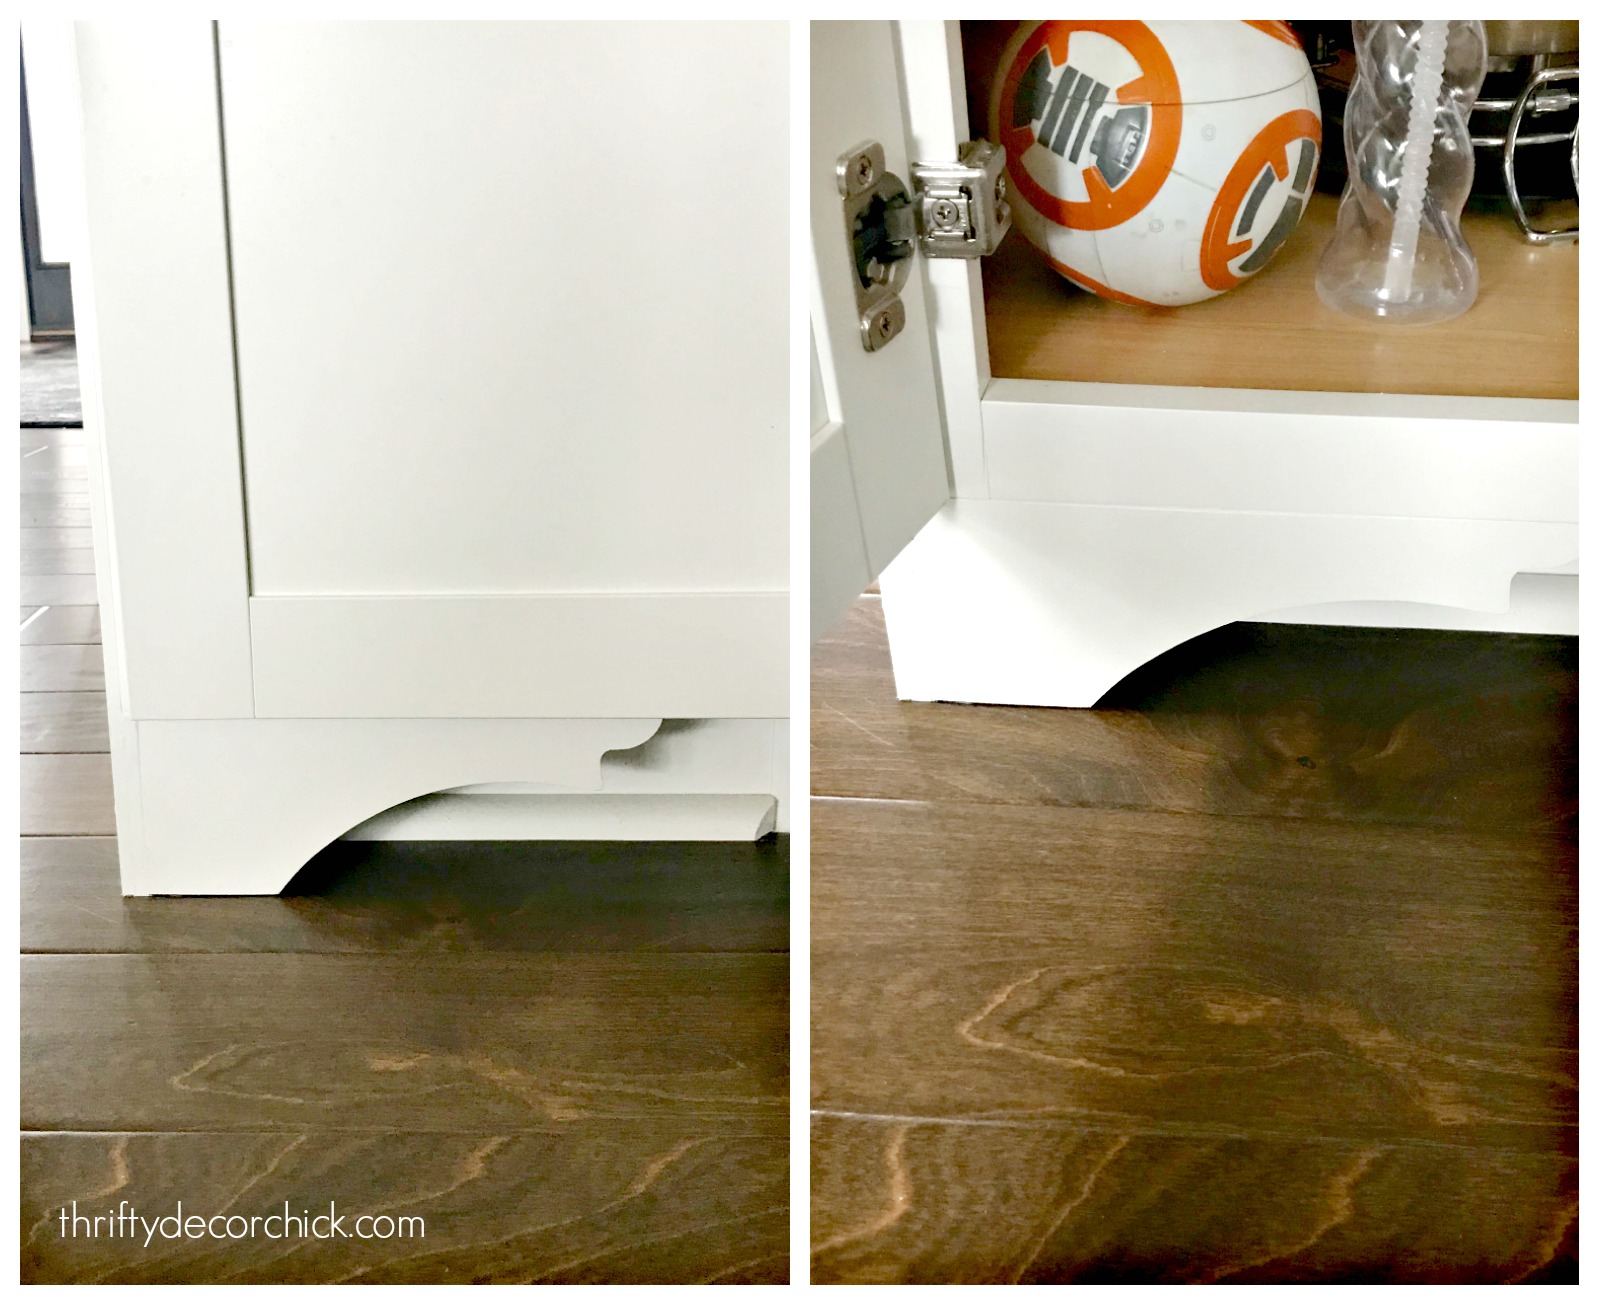 DIY furniture feet for basic kitchen cabinets from Thrifty Decor Chick